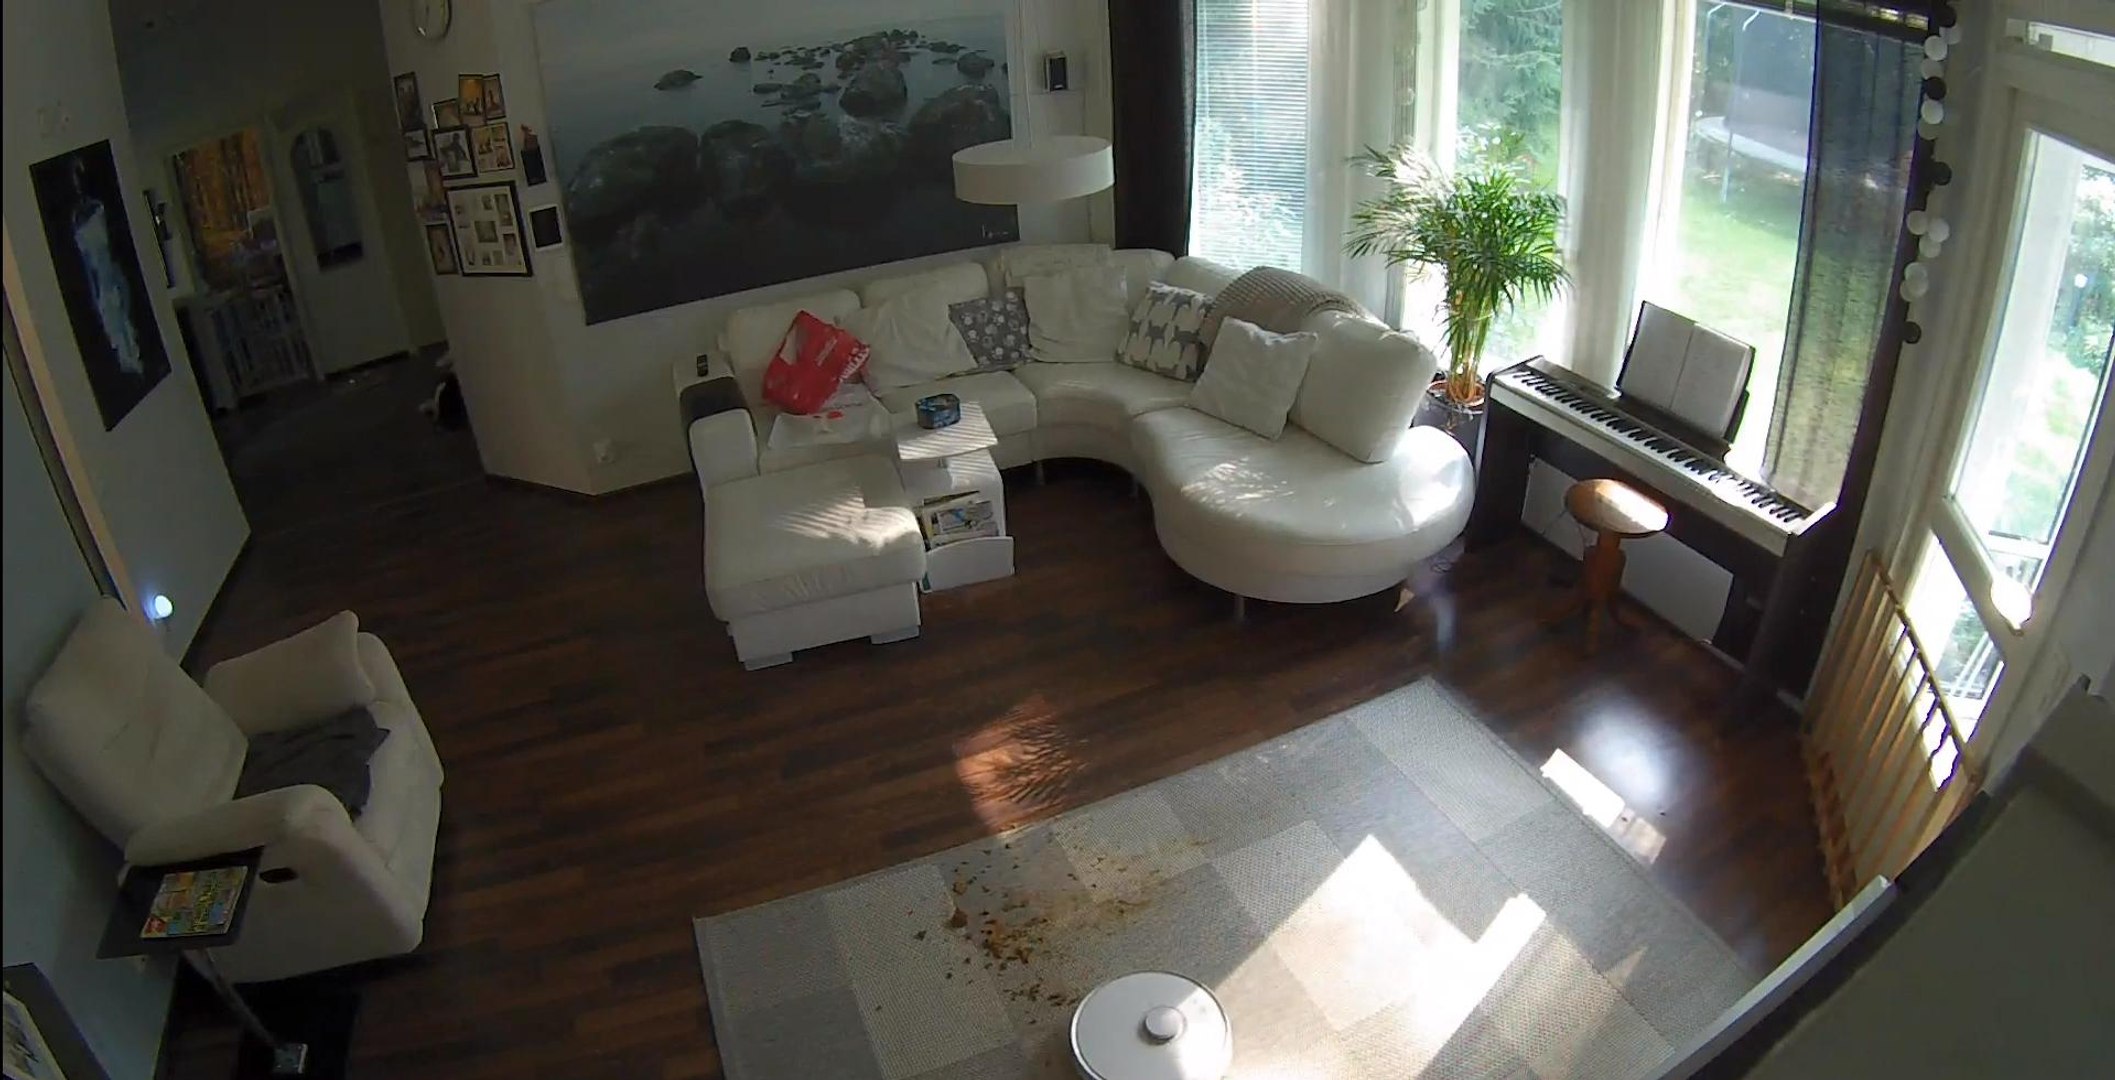 Roomba Vacuum Cleaner Creates a Mess by Spreading Dog Poop on Floor - video  Dailymotion